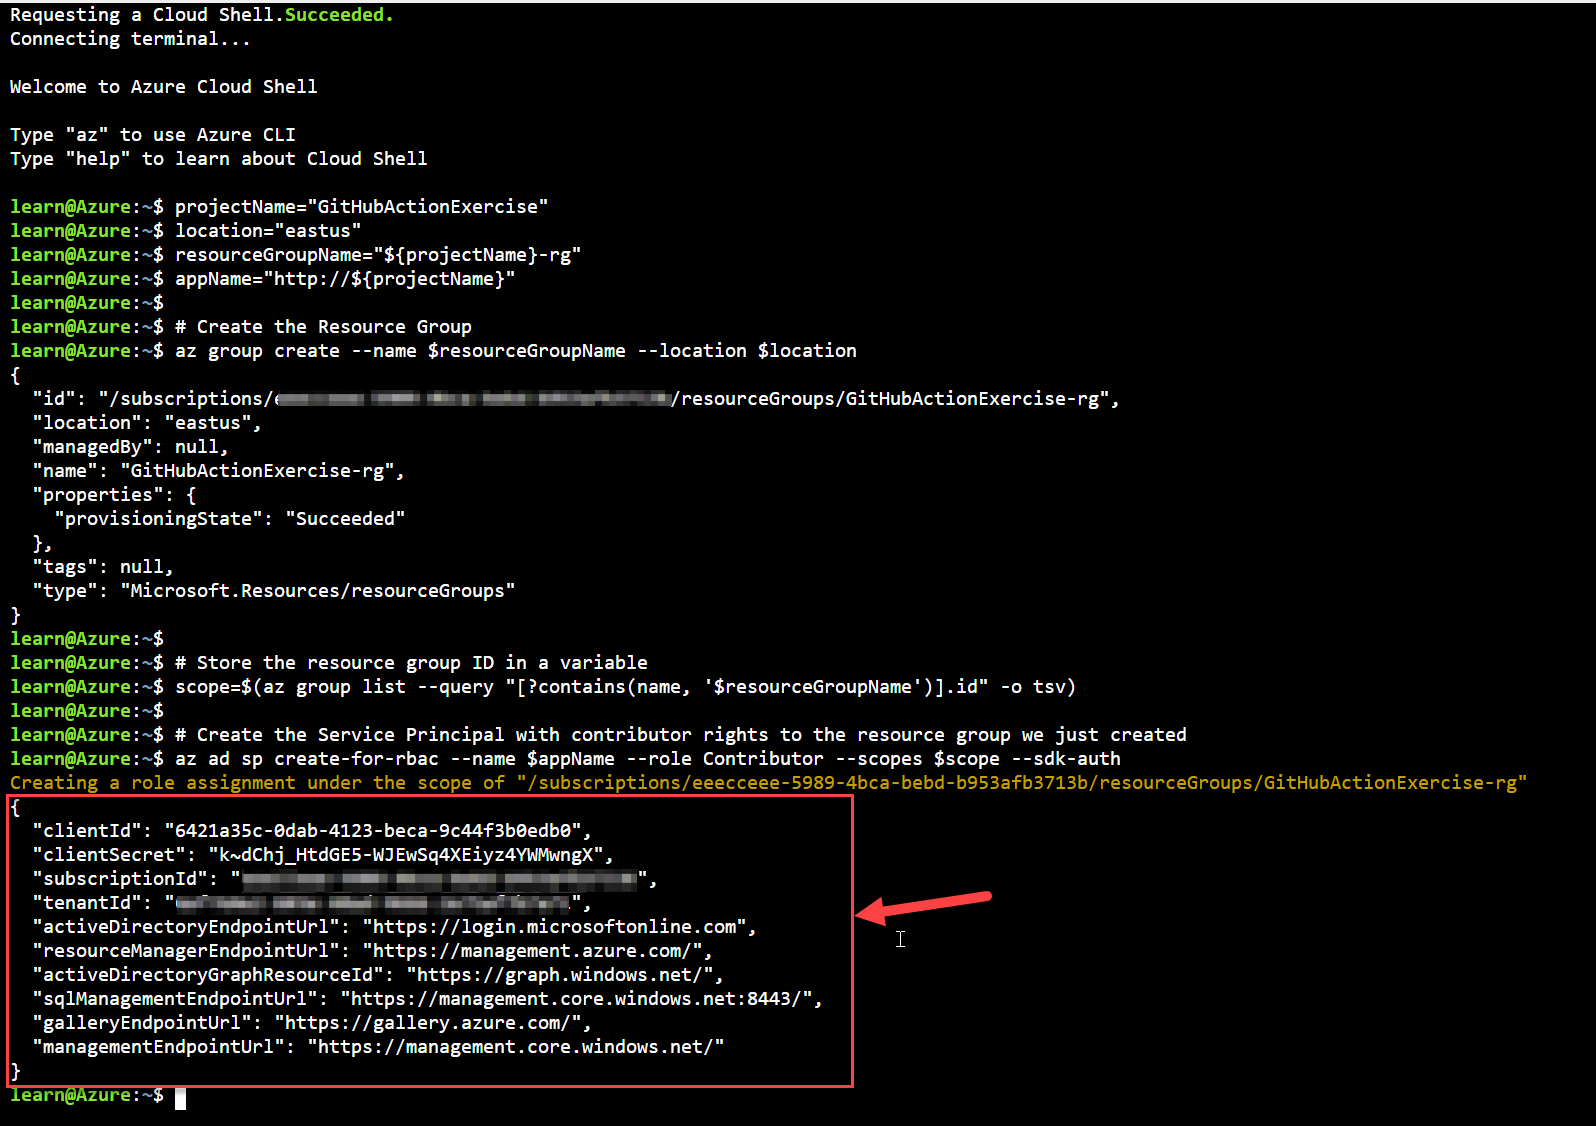 Screenshot that shows results for creating a service principal in Azure.